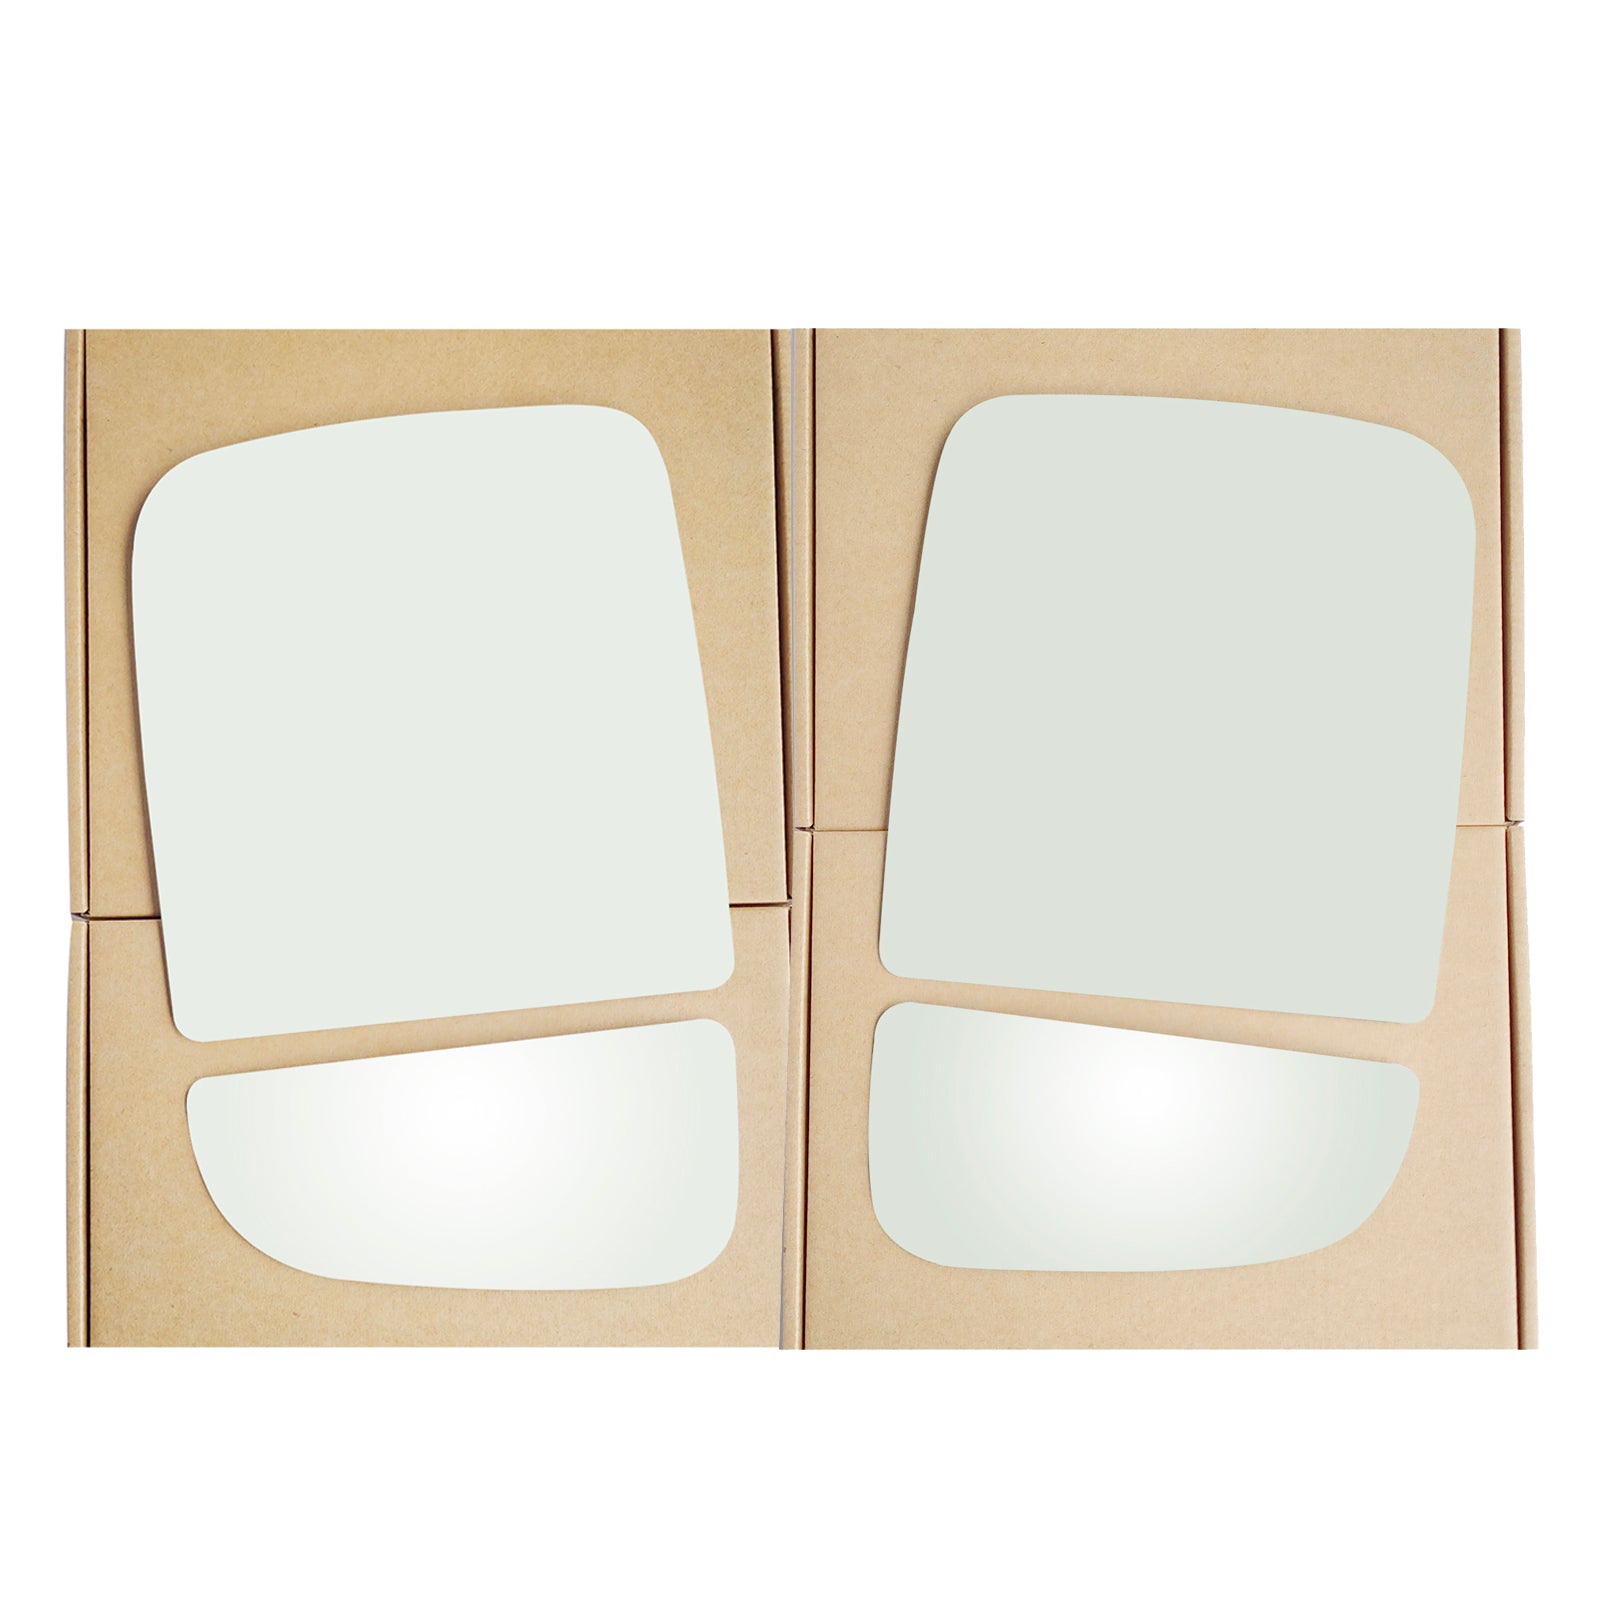 WLLW a pair of Towing Replacement Mirror Glass for 2010-2023 Dodge Ram Pickup Full Size, Driver Left Side LH/Passenger Right Side RH/The Both Sides Upper&Lower Flat Convex D-0006